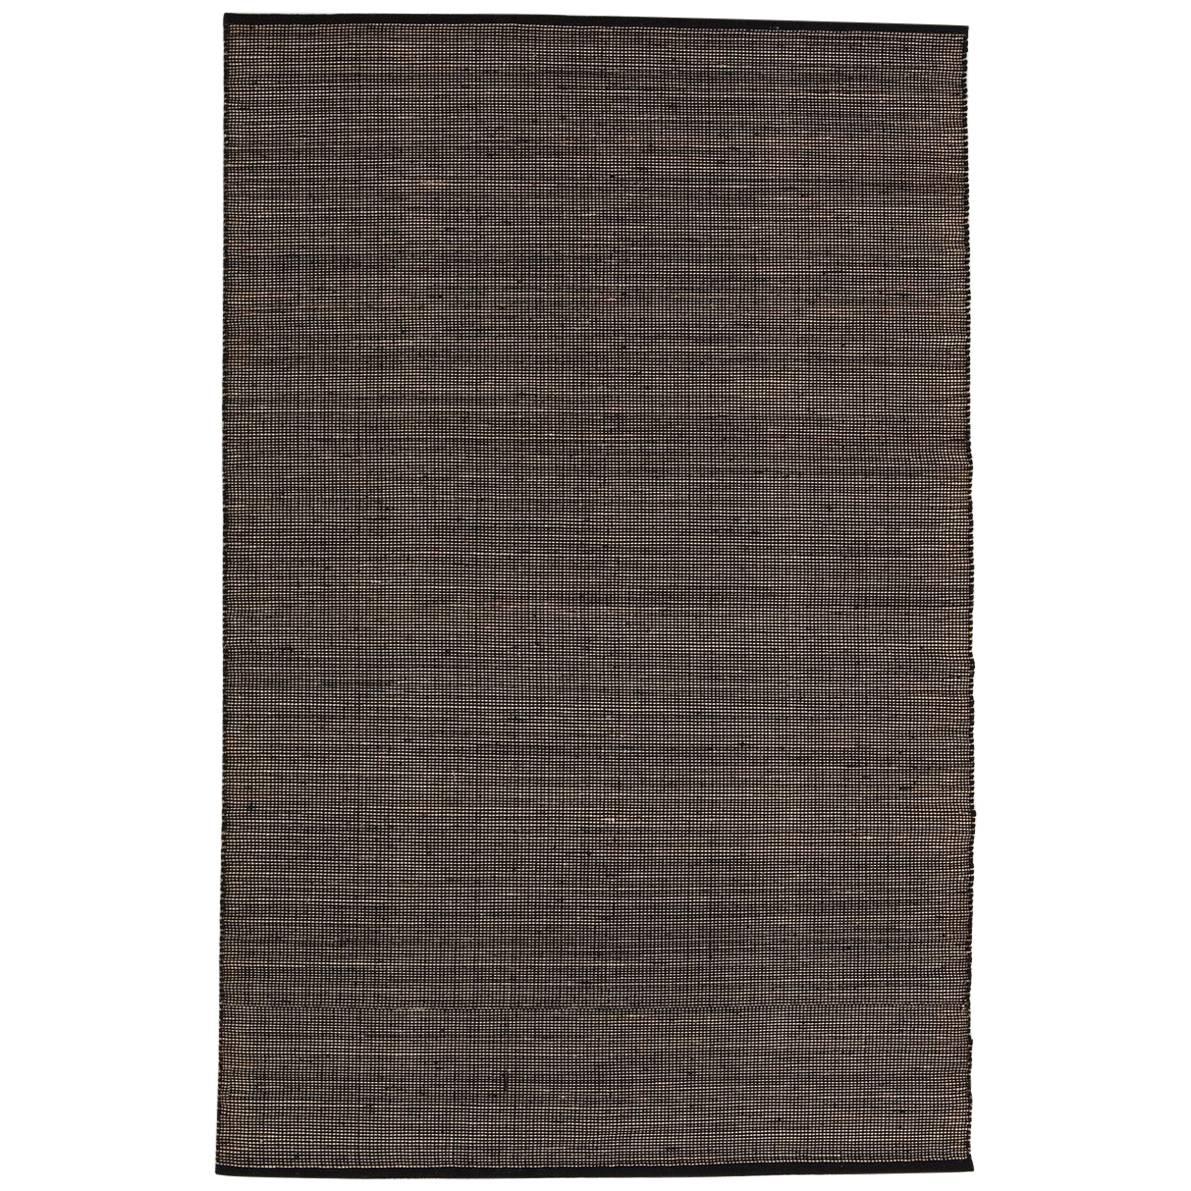 Tatami Small Black Wool and Jute Rug by Nani Marquina & Ariadna Miquel